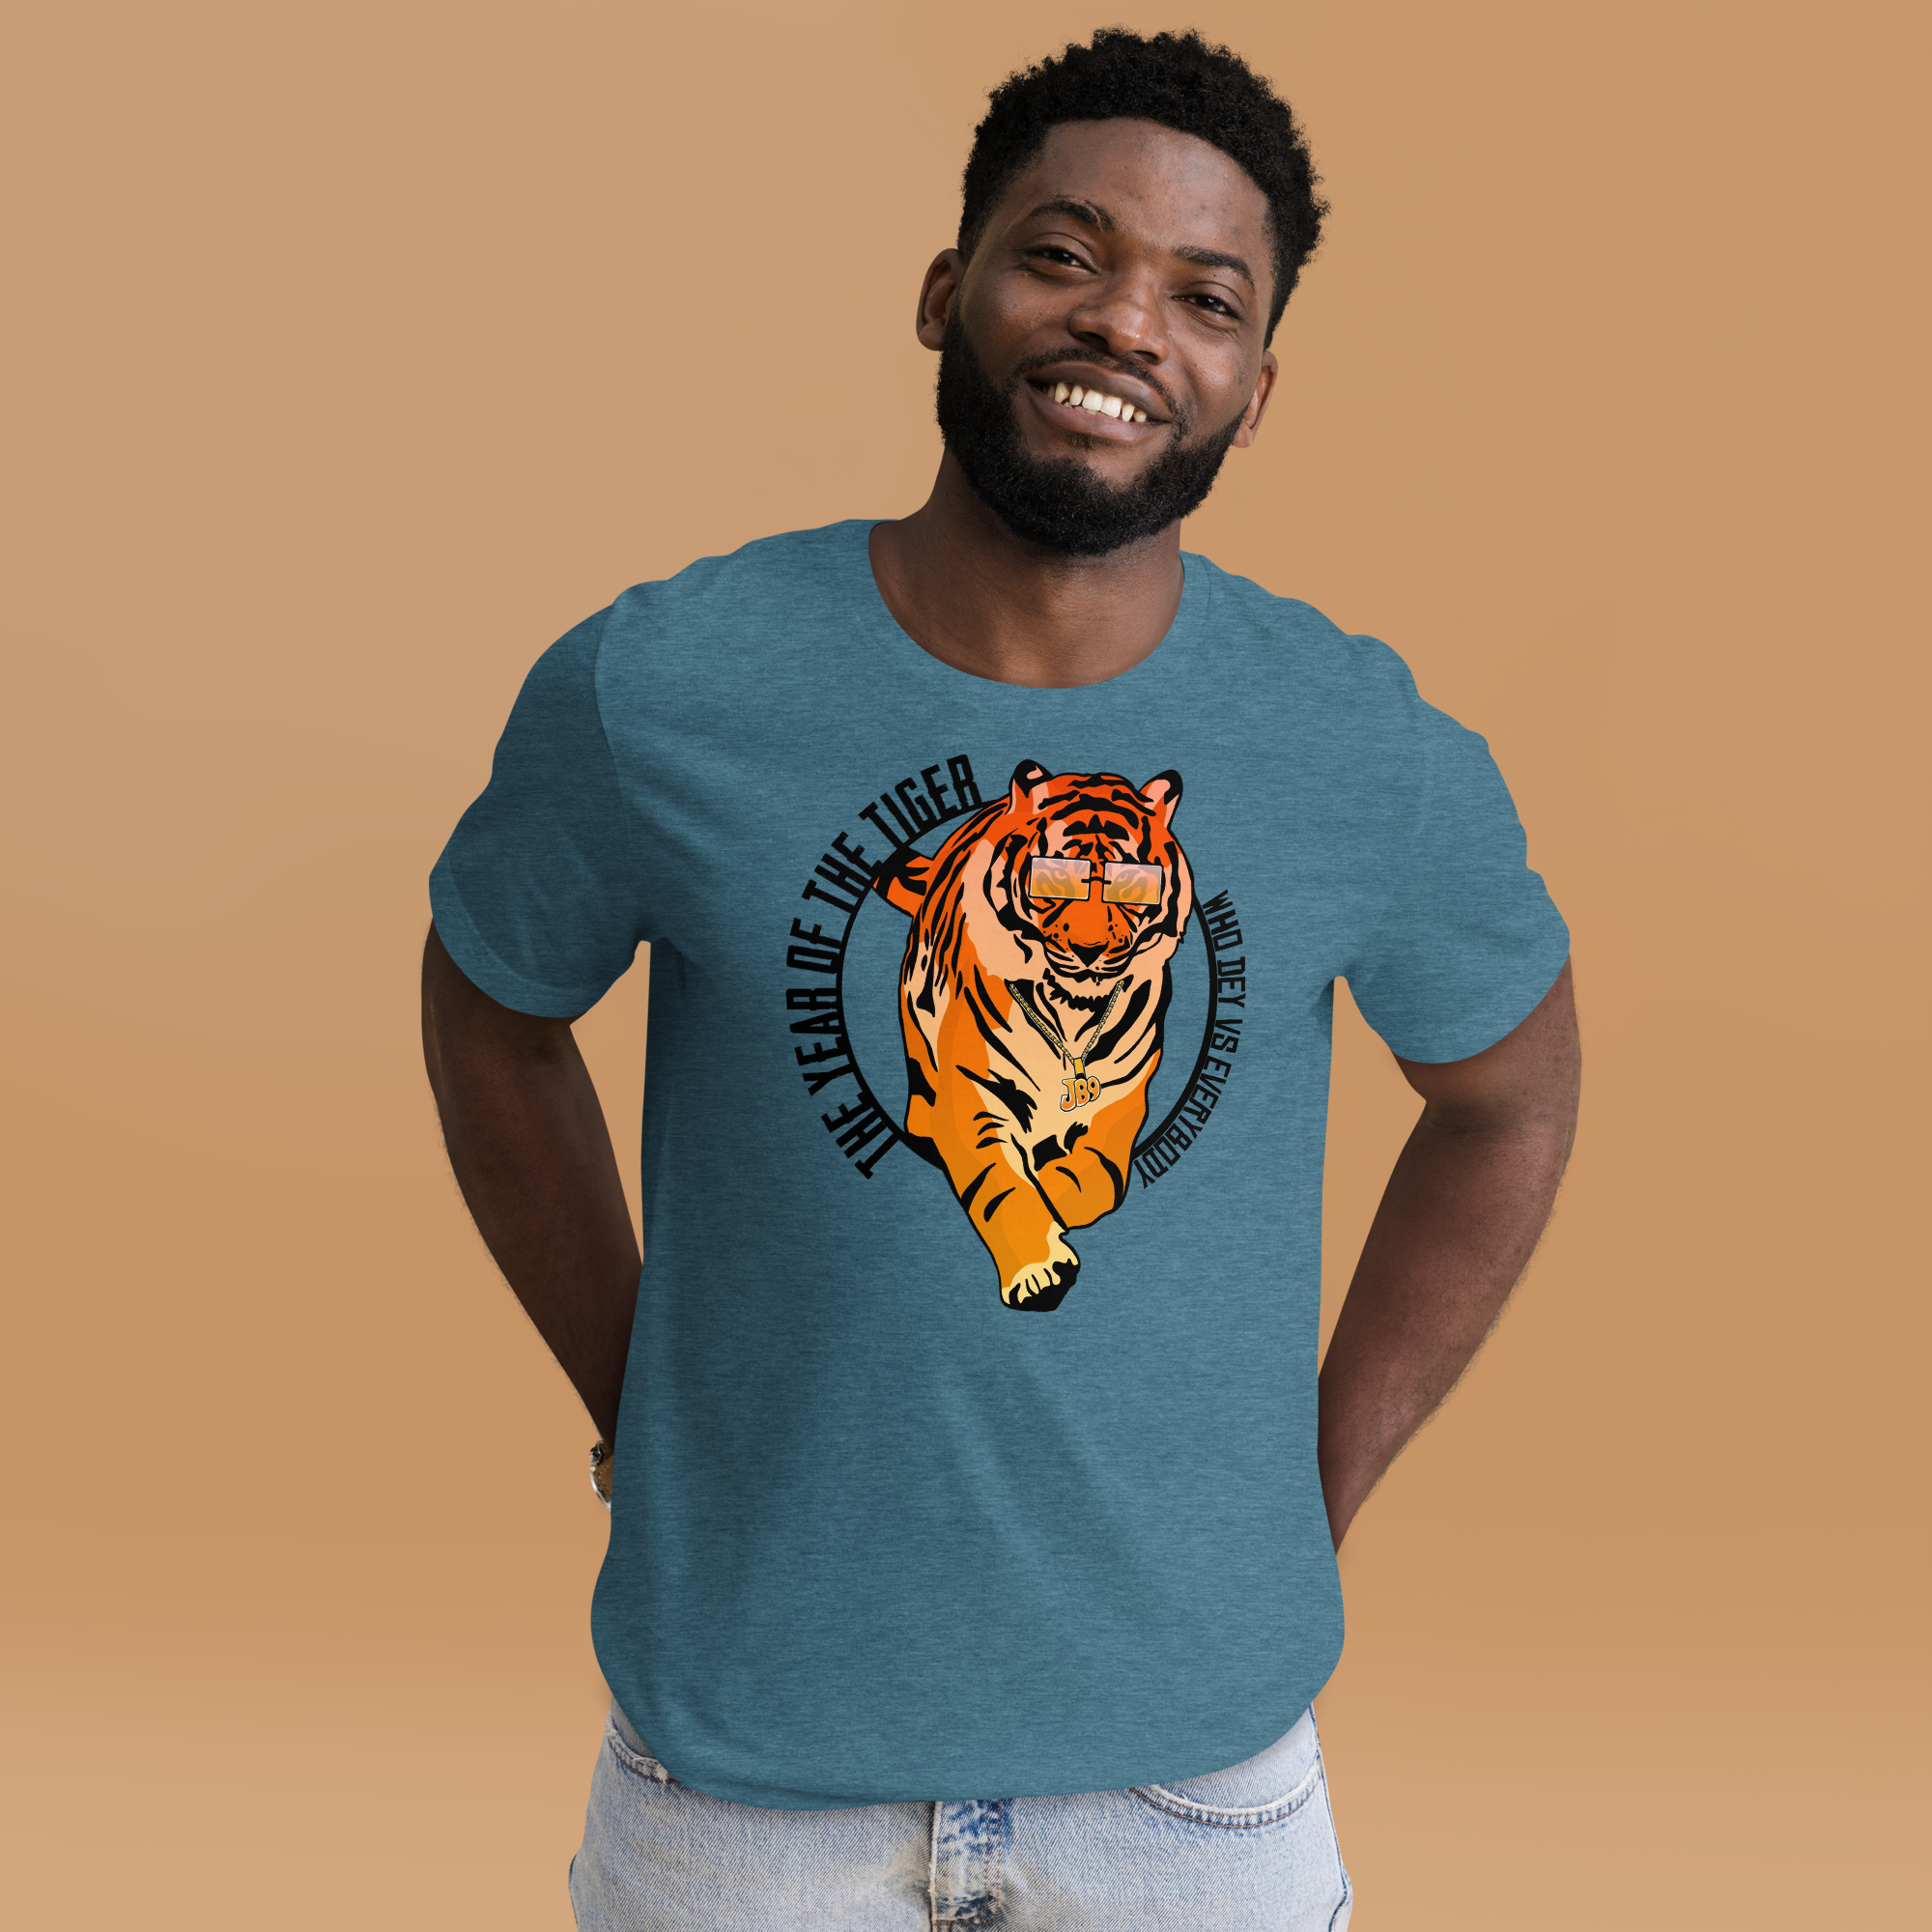 Year of the Tiger: Who Dey Vs Everybody